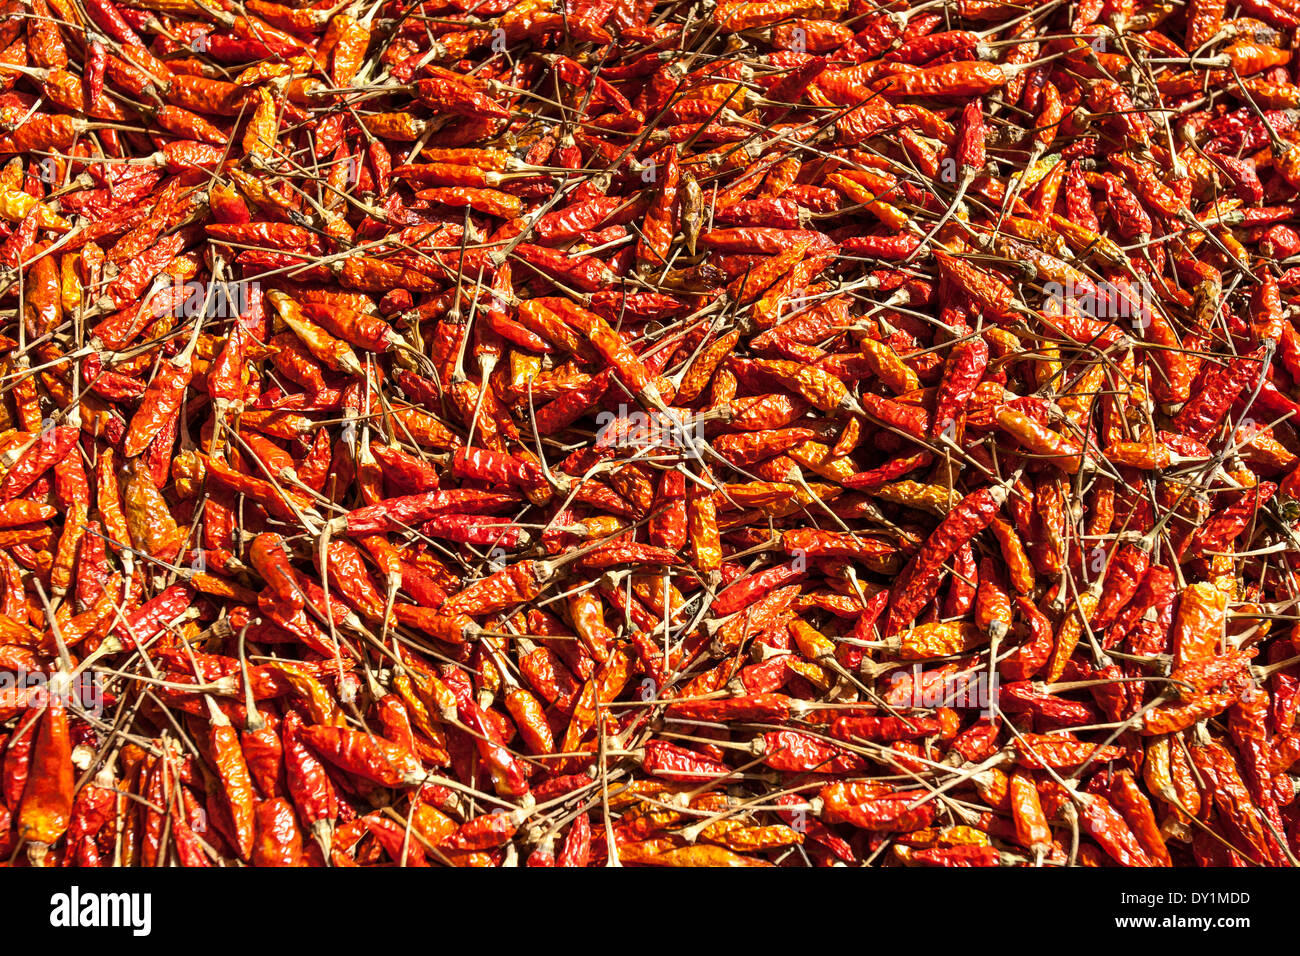 in the sun dried peppers for a long time Stock Photo